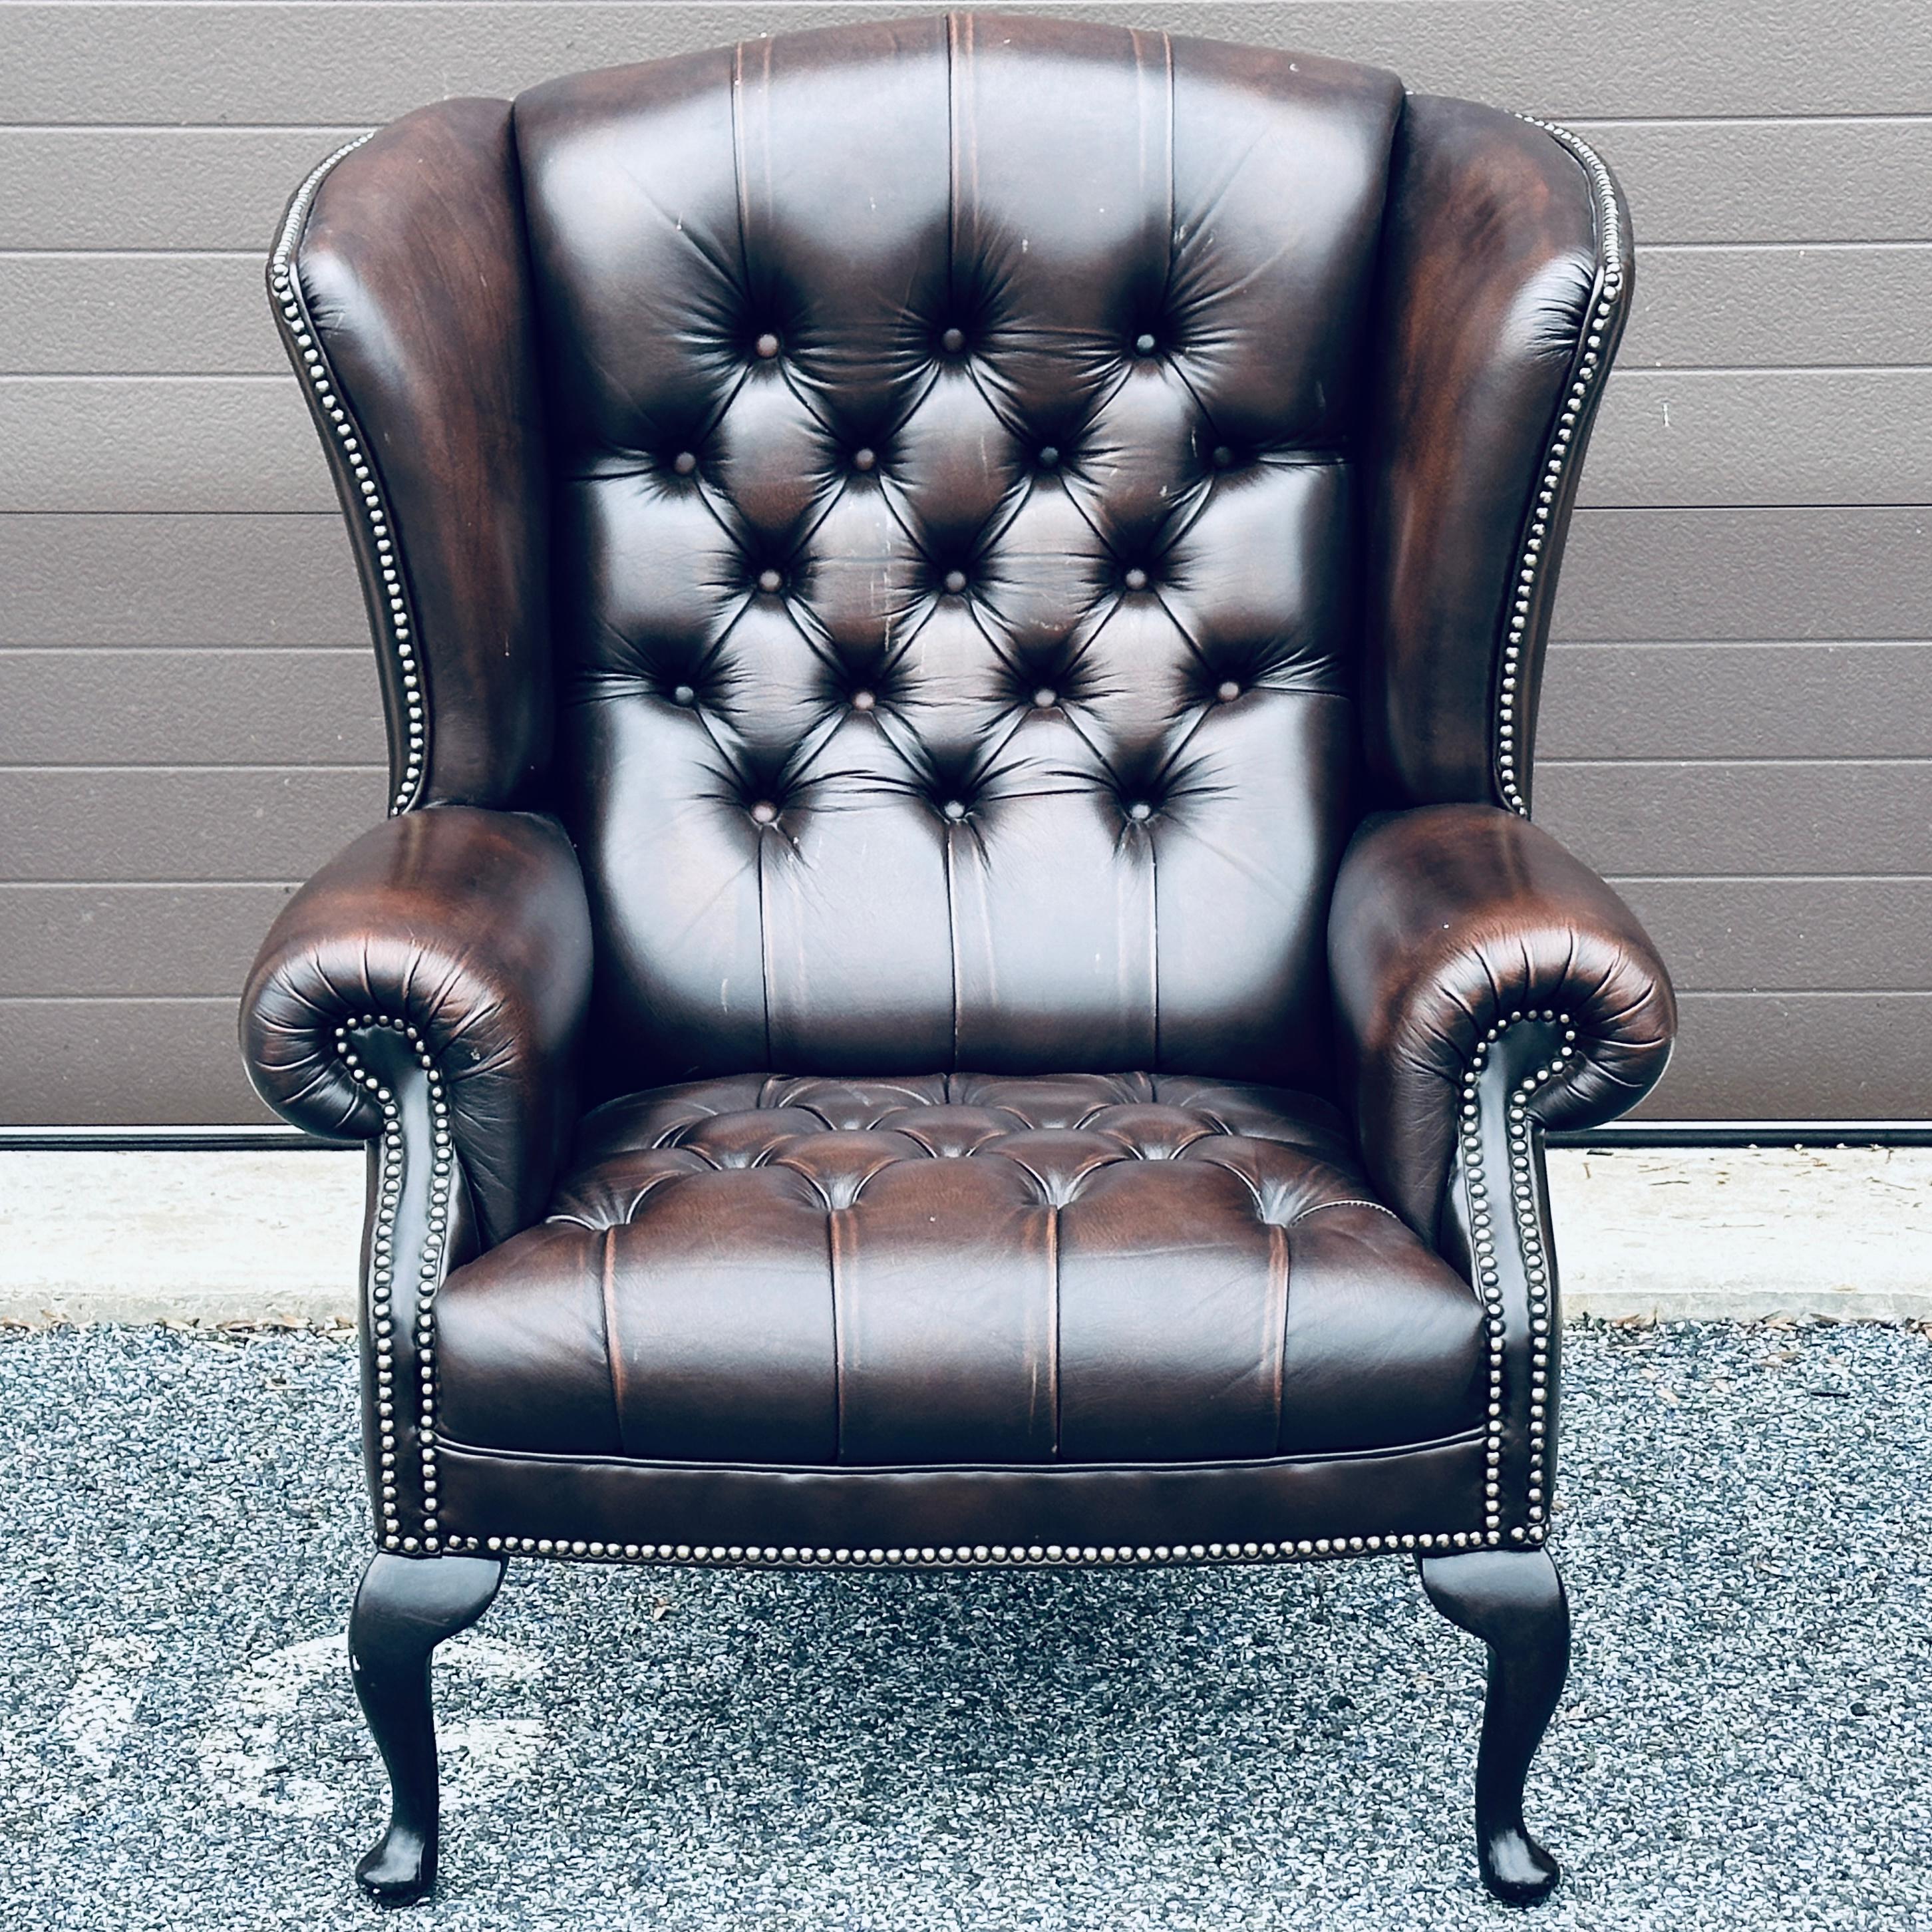 Classic tufted English dark brown leather wing chair. Made in England by notable maker Pendragon.